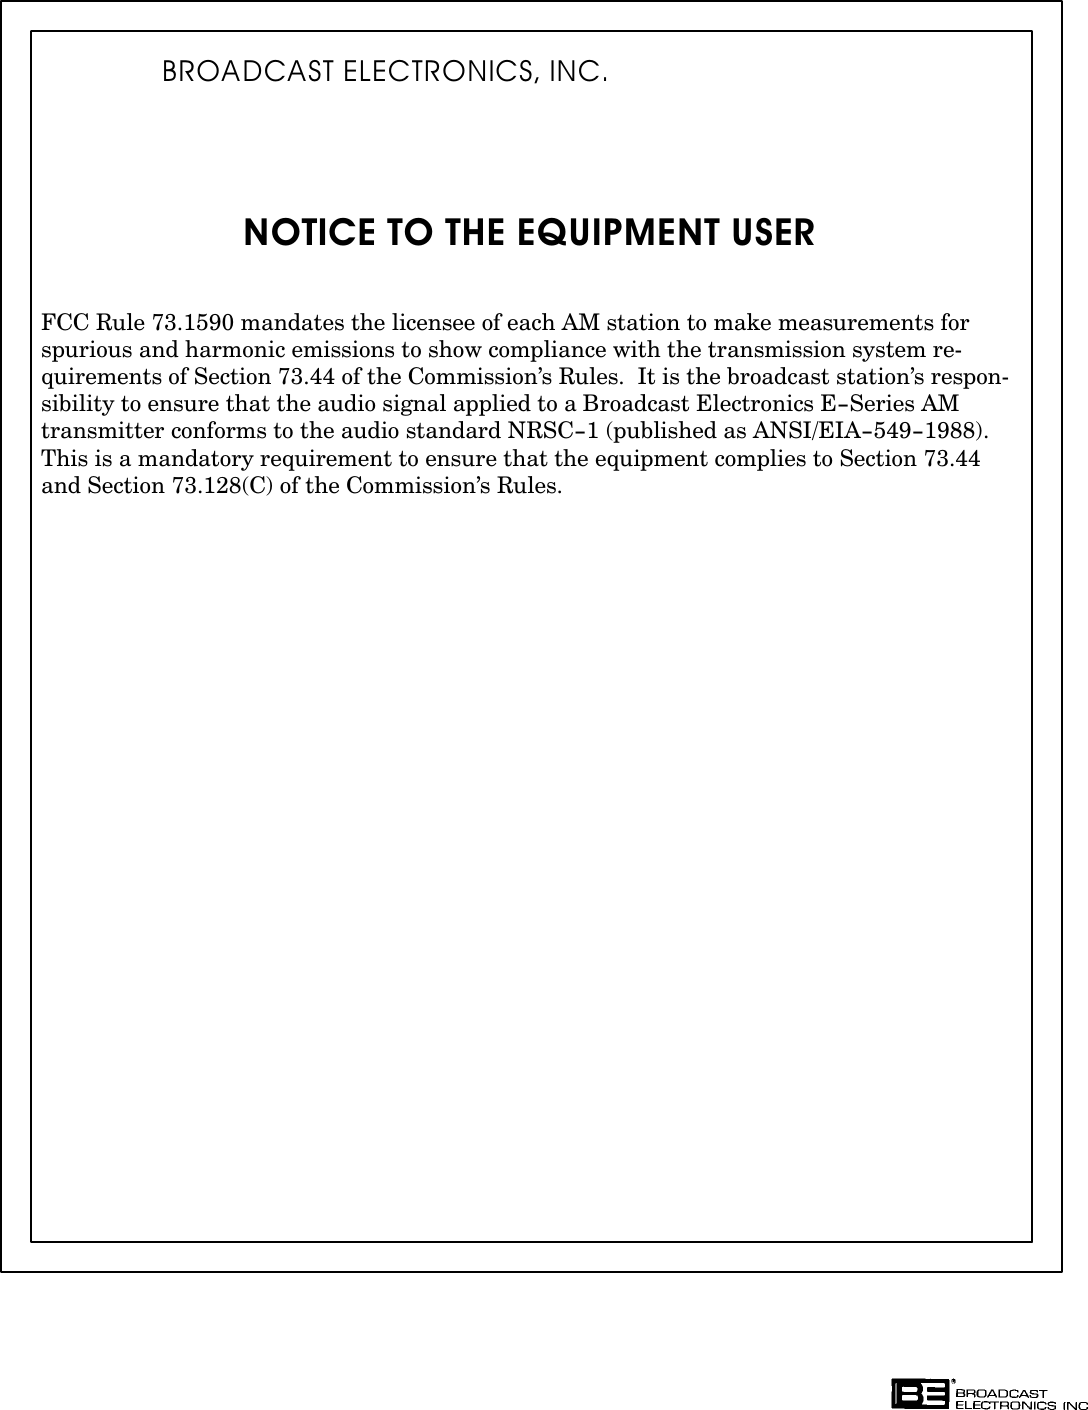 NOTICE TO THE EQUIPMENT USERFCC Rule 73.1590 mandates the licensee of each AM station to make measurements forspurious and harmonic emissions to show compliance with the transmission system reĆquirements of Section 73.44 of the Commission&apos;s Rules.  It is the broadcast station&apos;s responĆsibility to ensure that the audio signal applied to a Broadcast Electronics E-Series AMtransmitter conforms to the audio standard NRSC-1 (published as ANSI/EIA-549-1988).This is a mandatory requirement to ensure that the equipment complies to Section 73.44and Section 73.128(C) of the Commission&apos;s Rules.BROADCAST ELECTRONICS, INC.